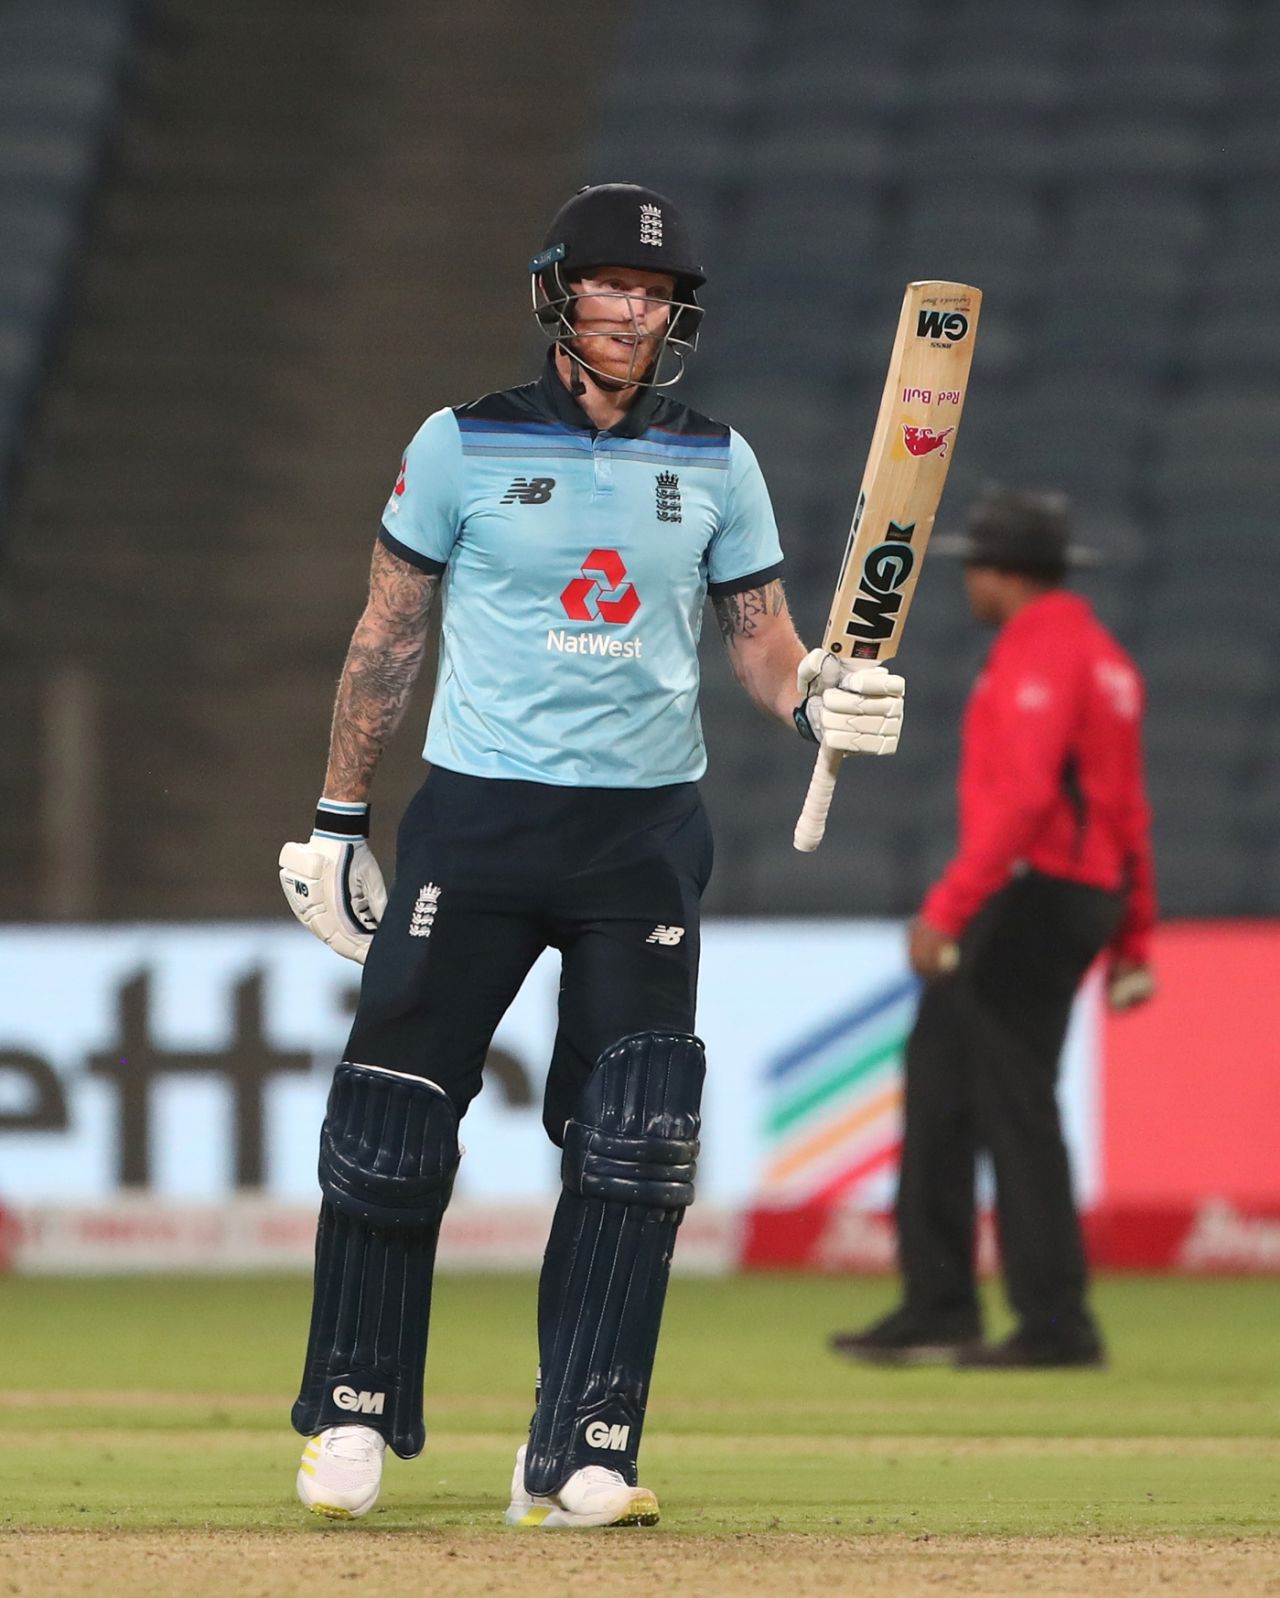 Ben Stokes raced to 50 off 40 balls, India vs England, 2nd ODI, Pune, March 26, 2021